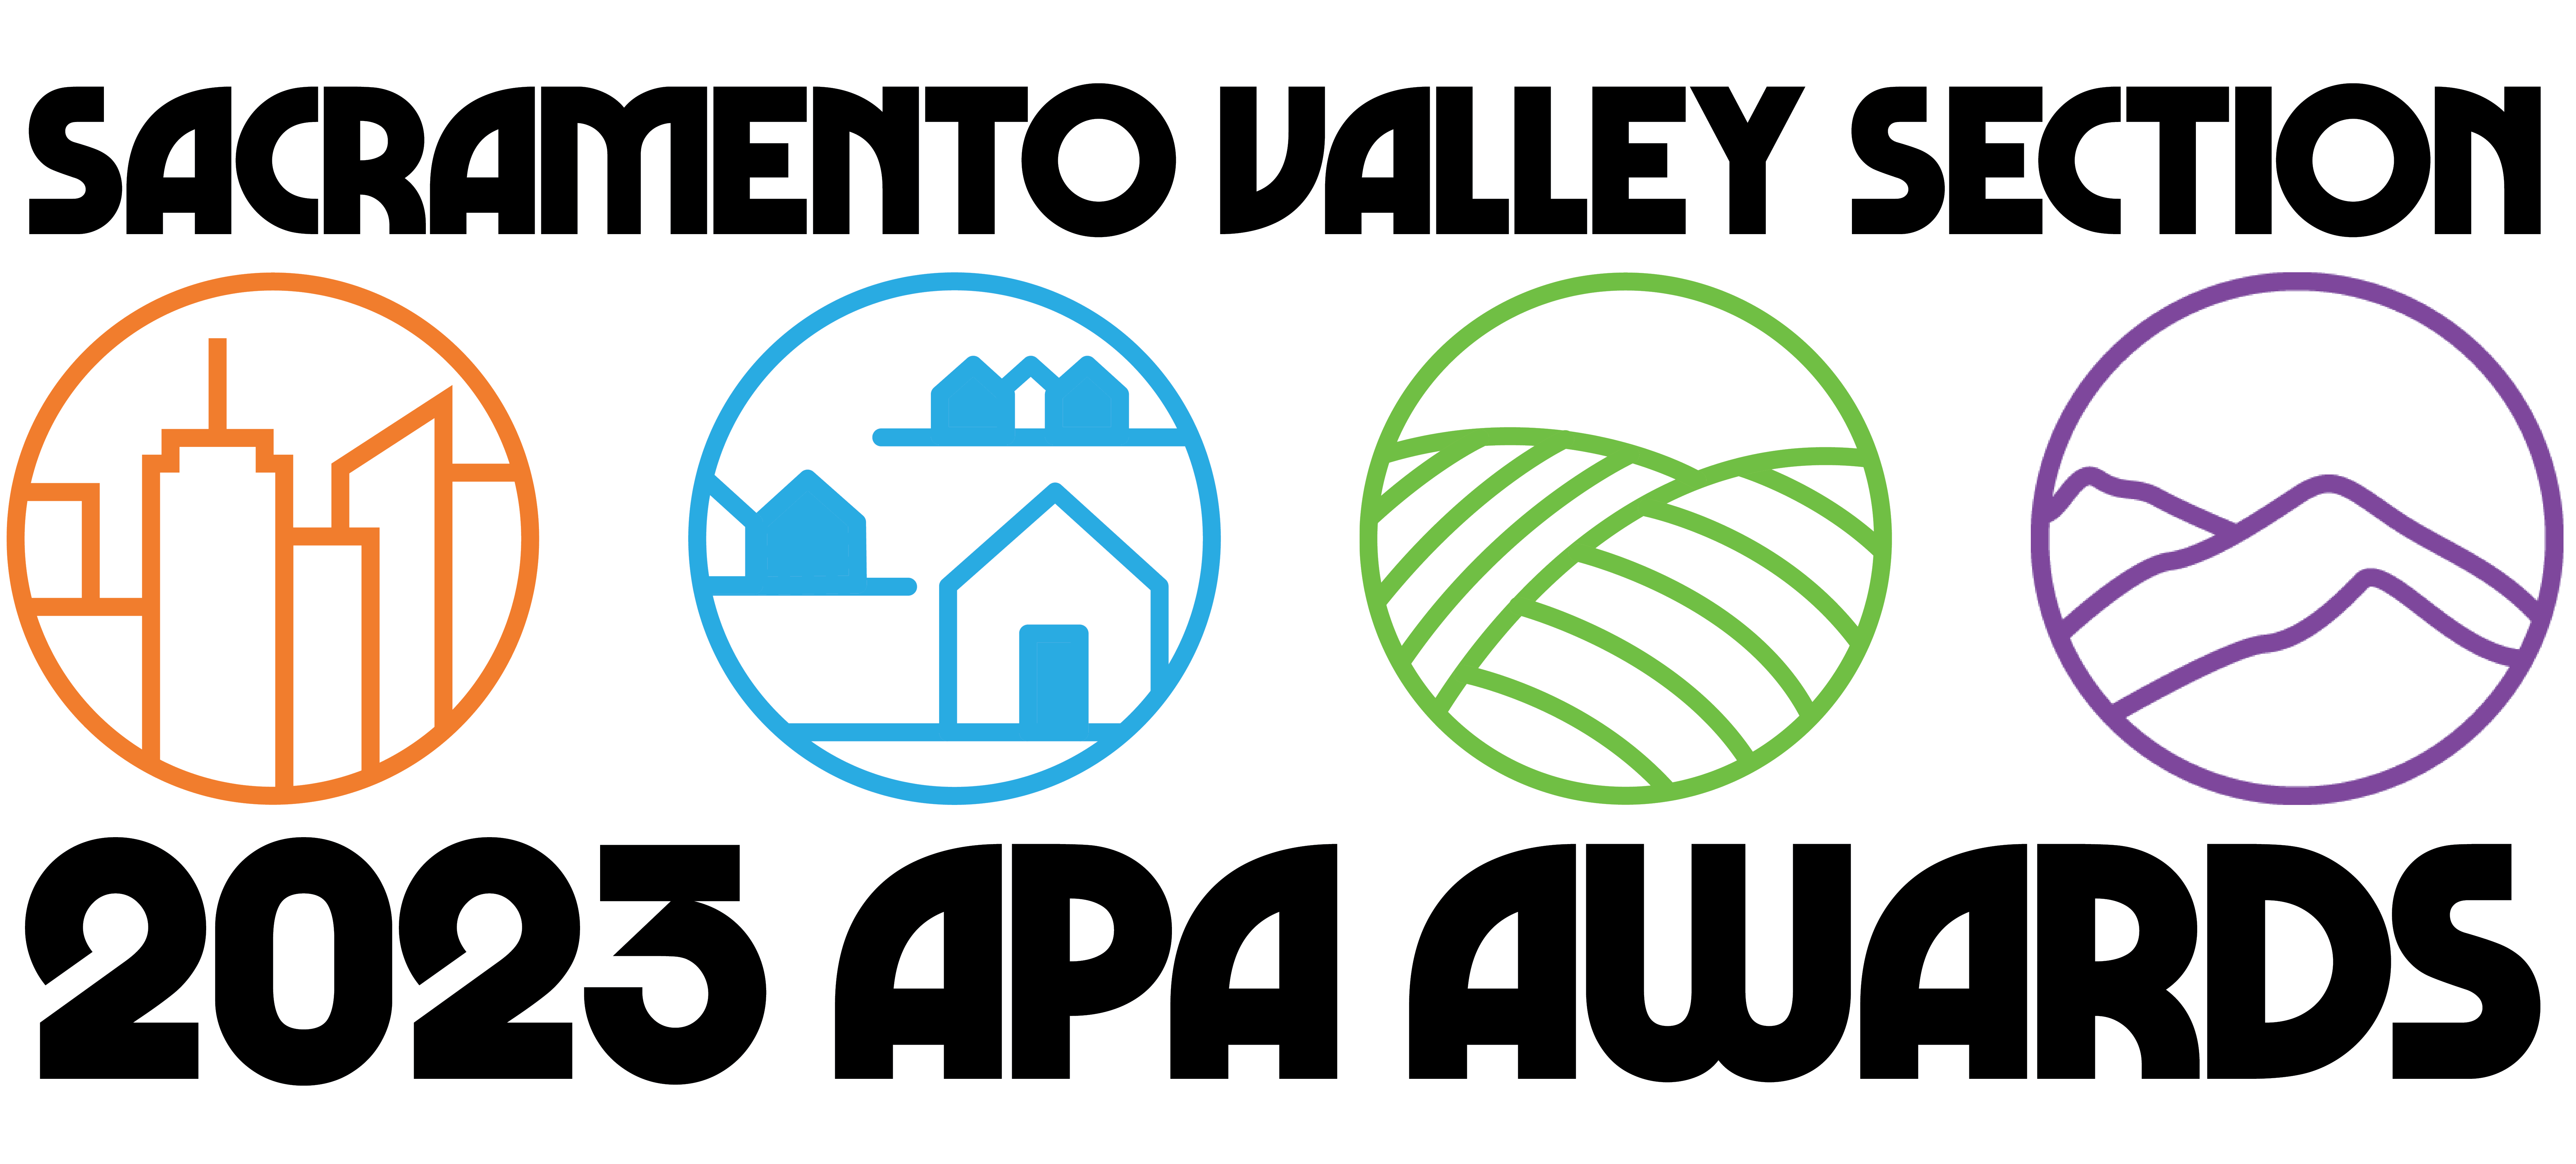  Winner of the 2023 Sacramento Valley Section American Planning Association Academic Award of Excellence